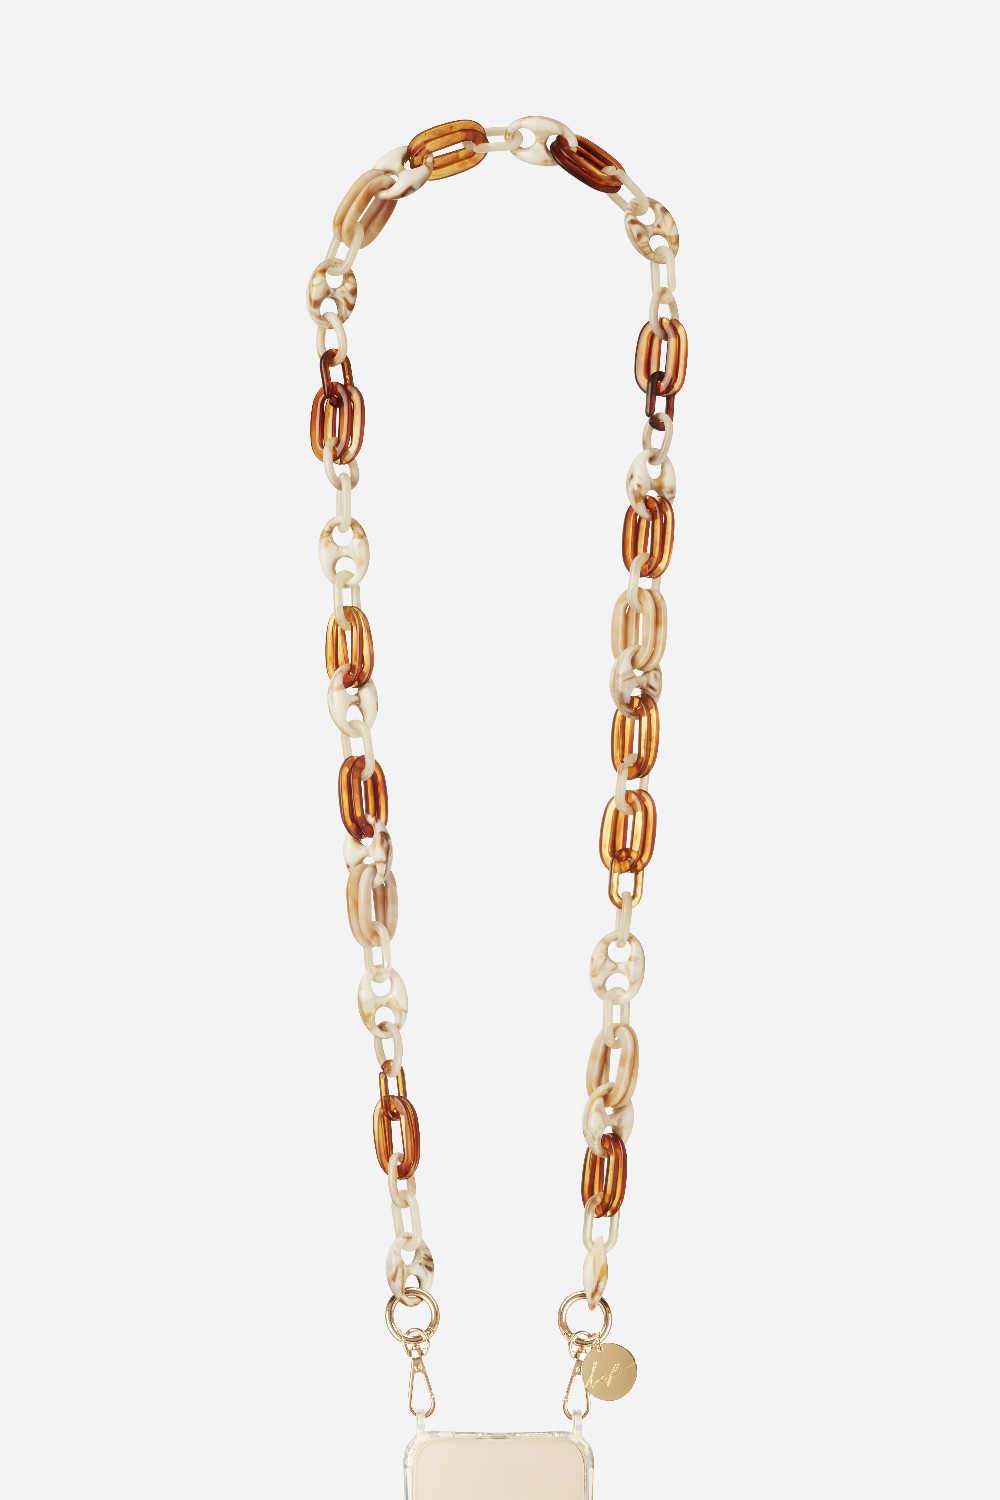 Andy Beige Long Chain 120 cm